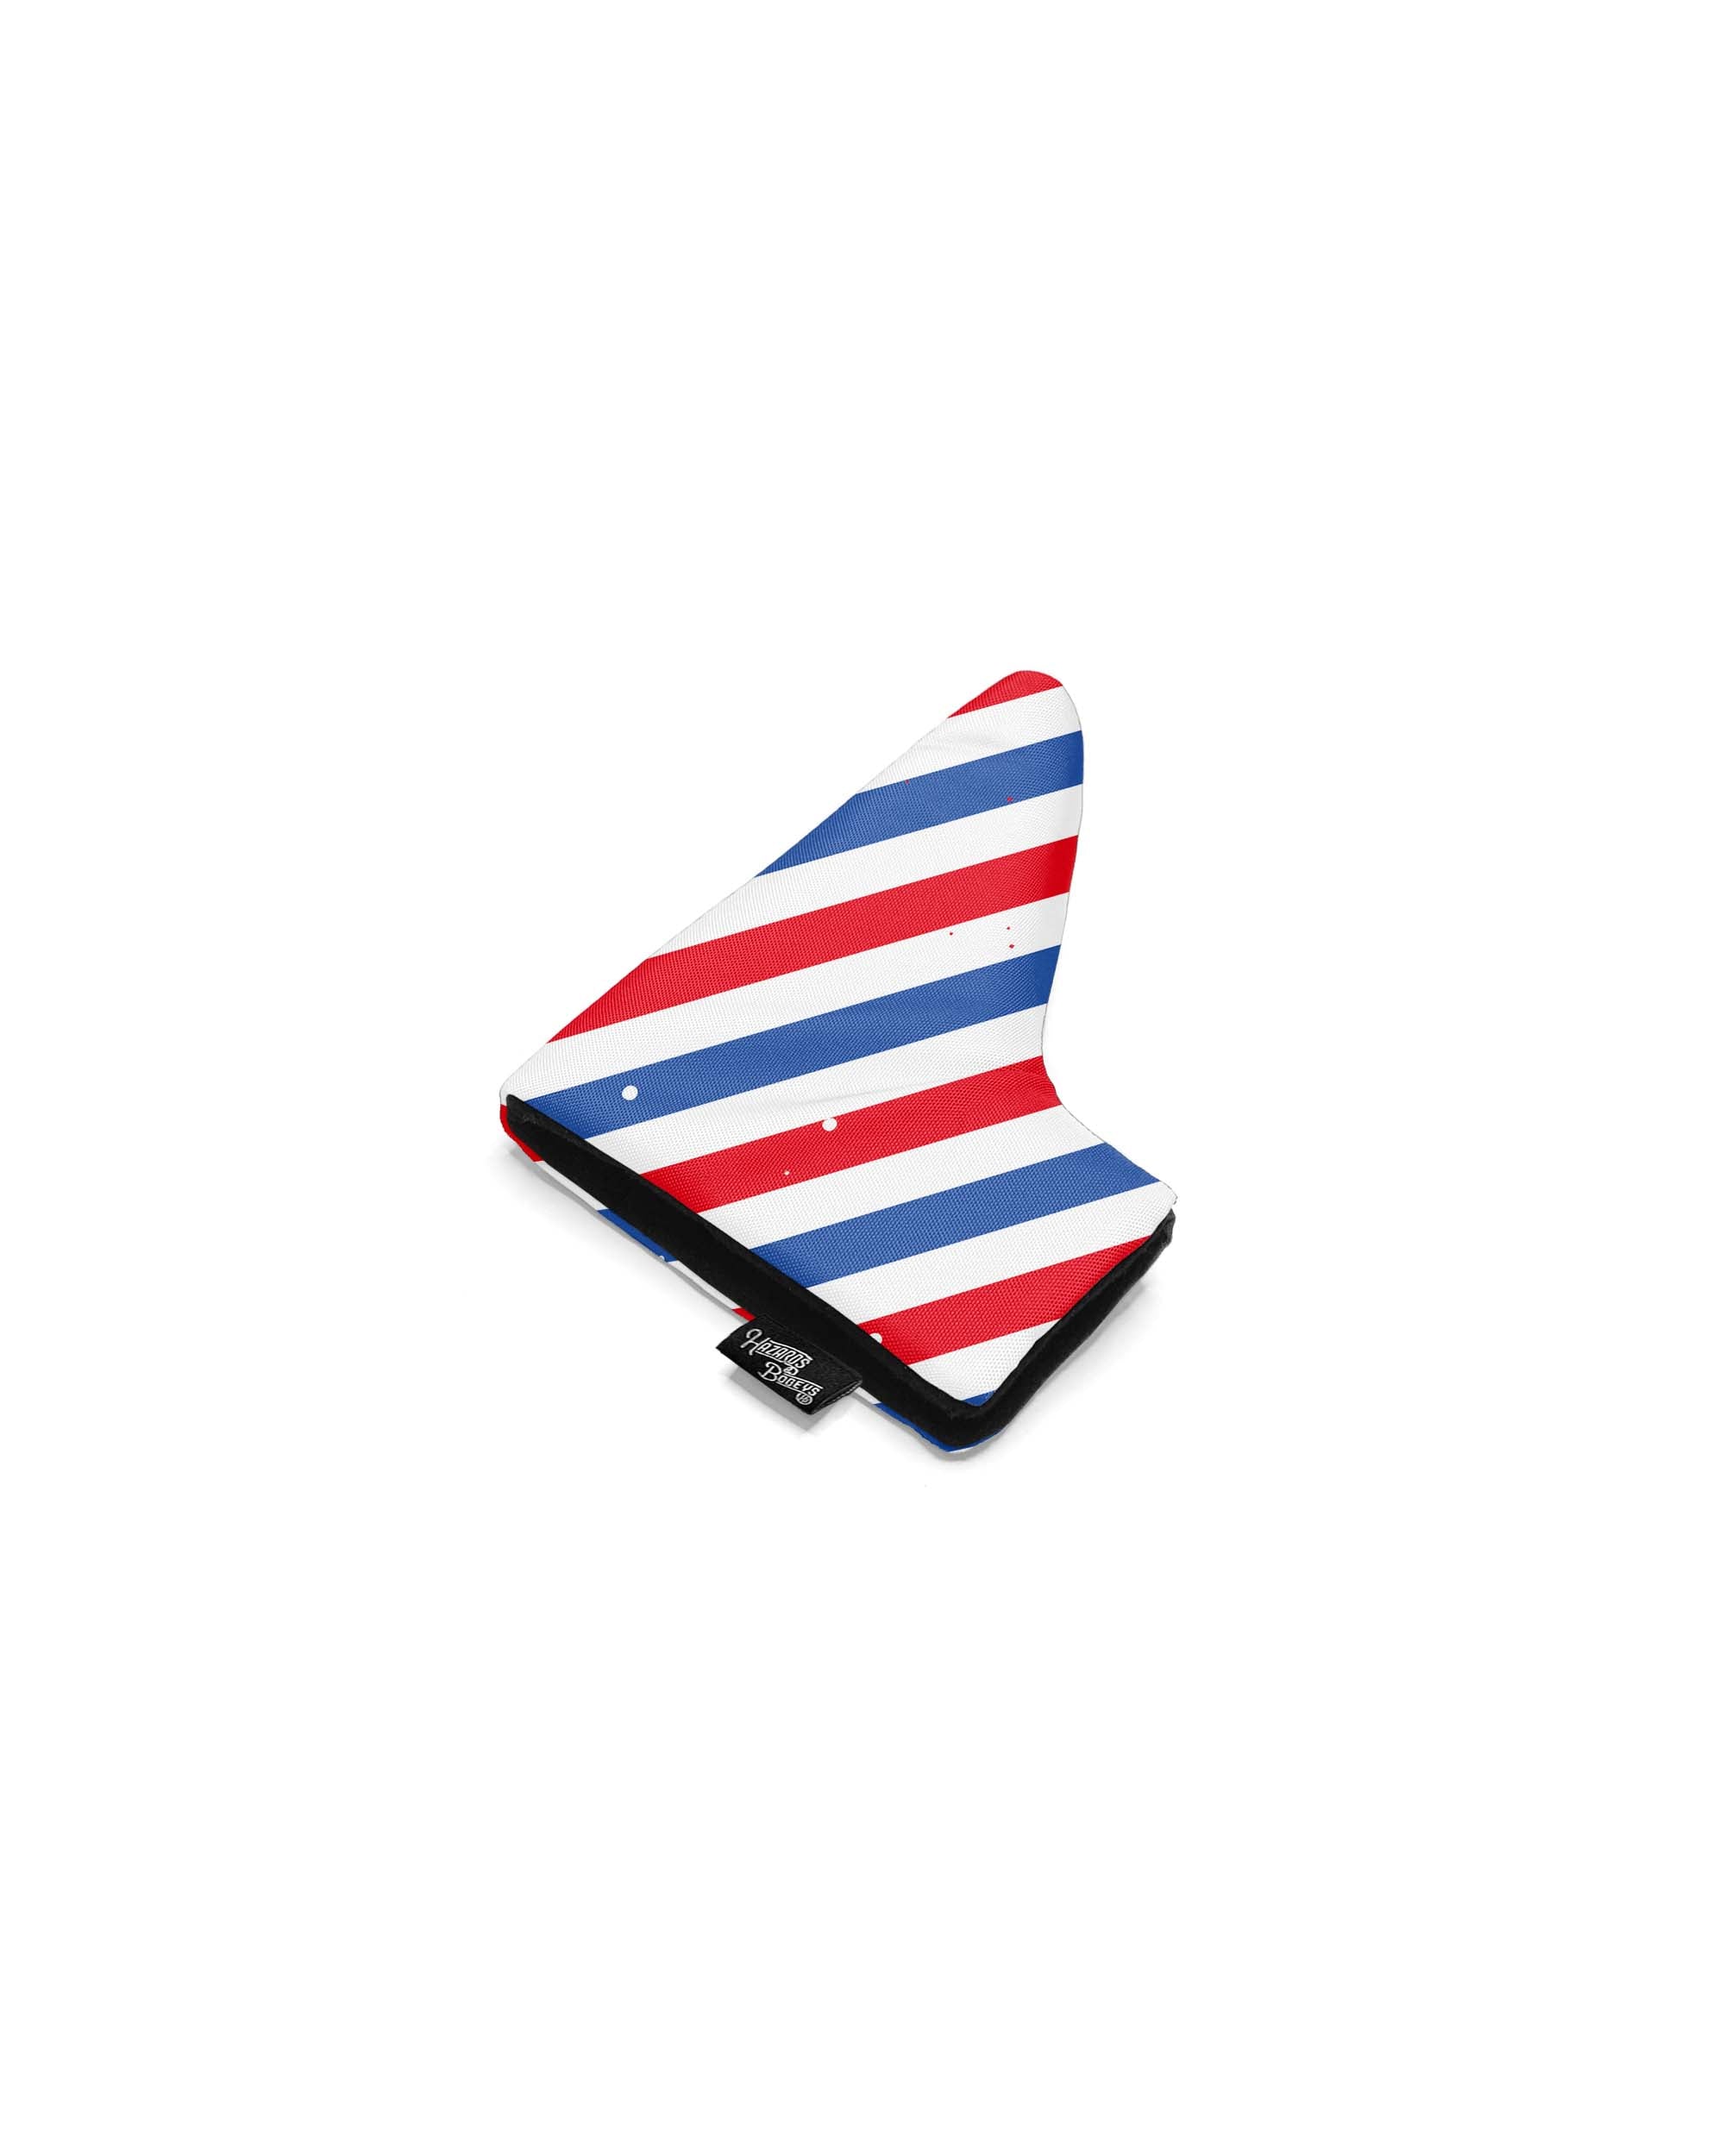 Barber Pole Blade Cover